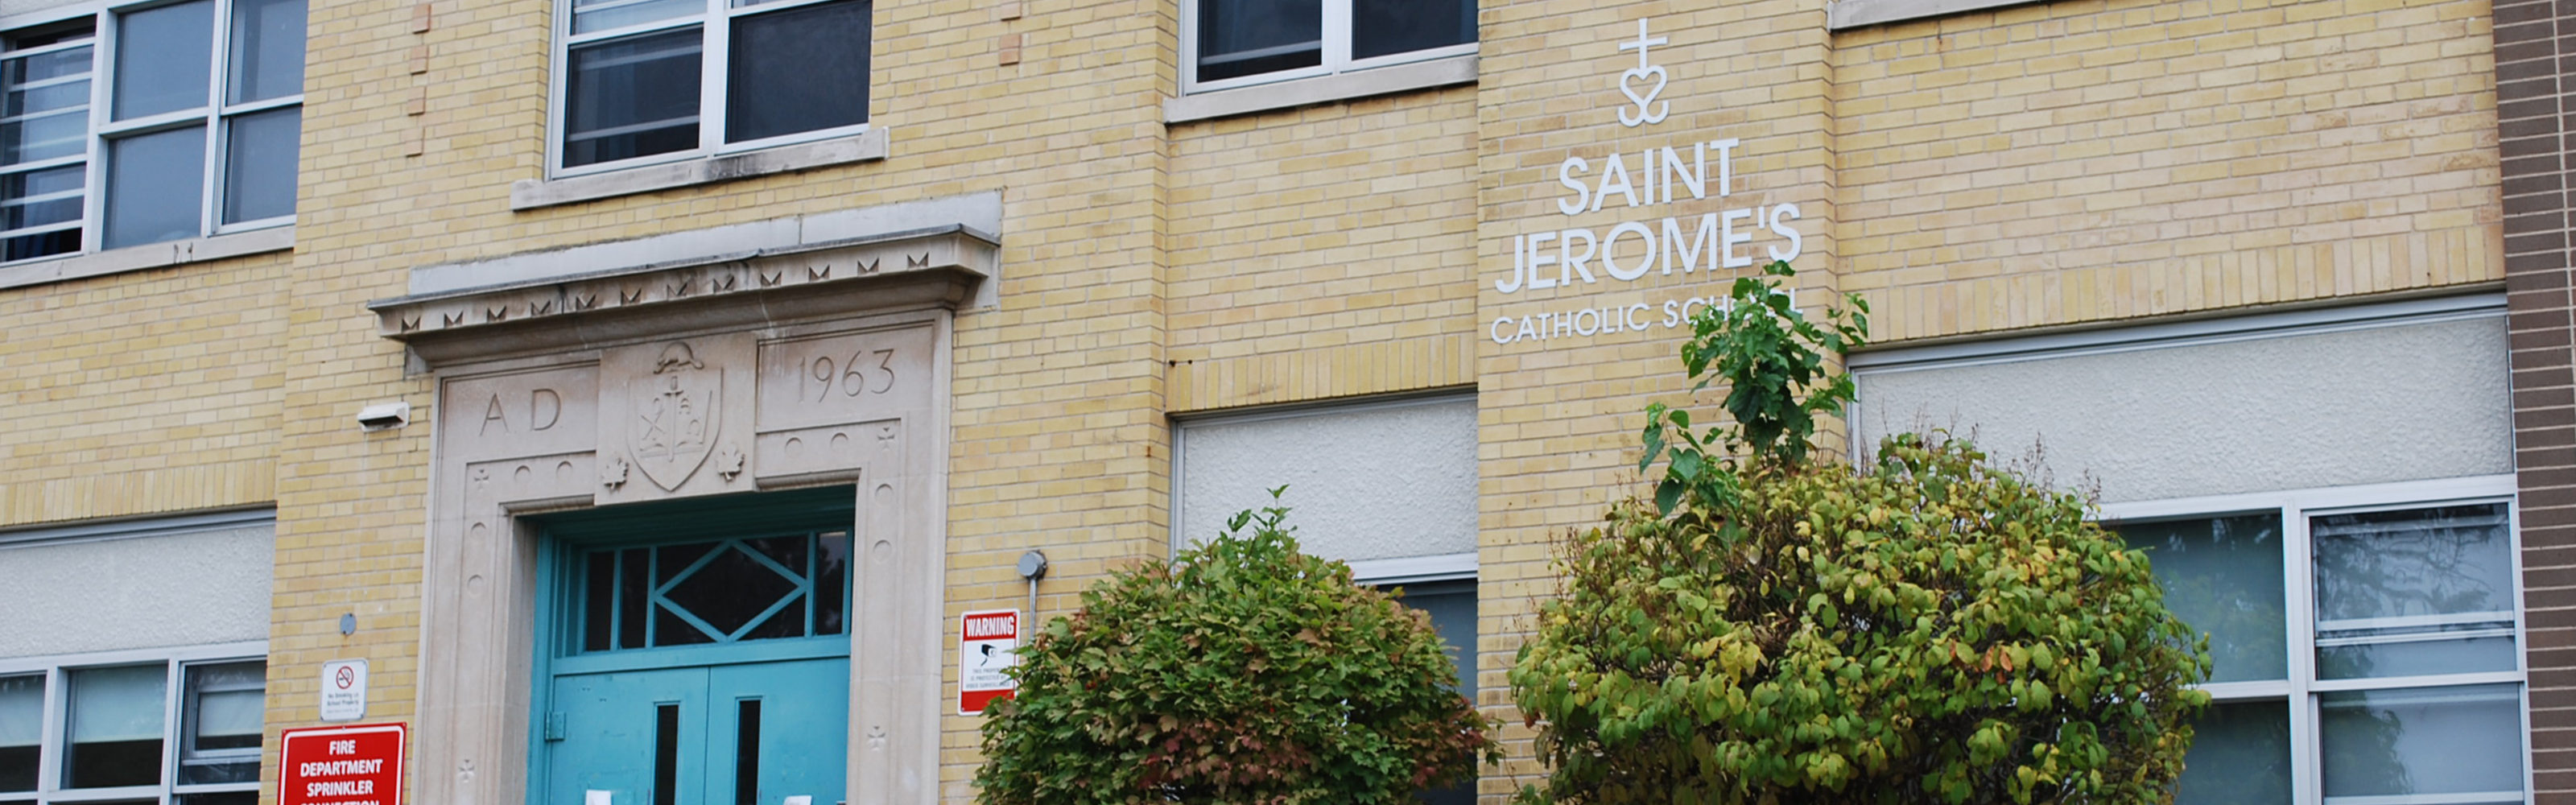 The front of the St. Jerome Catholic School building.